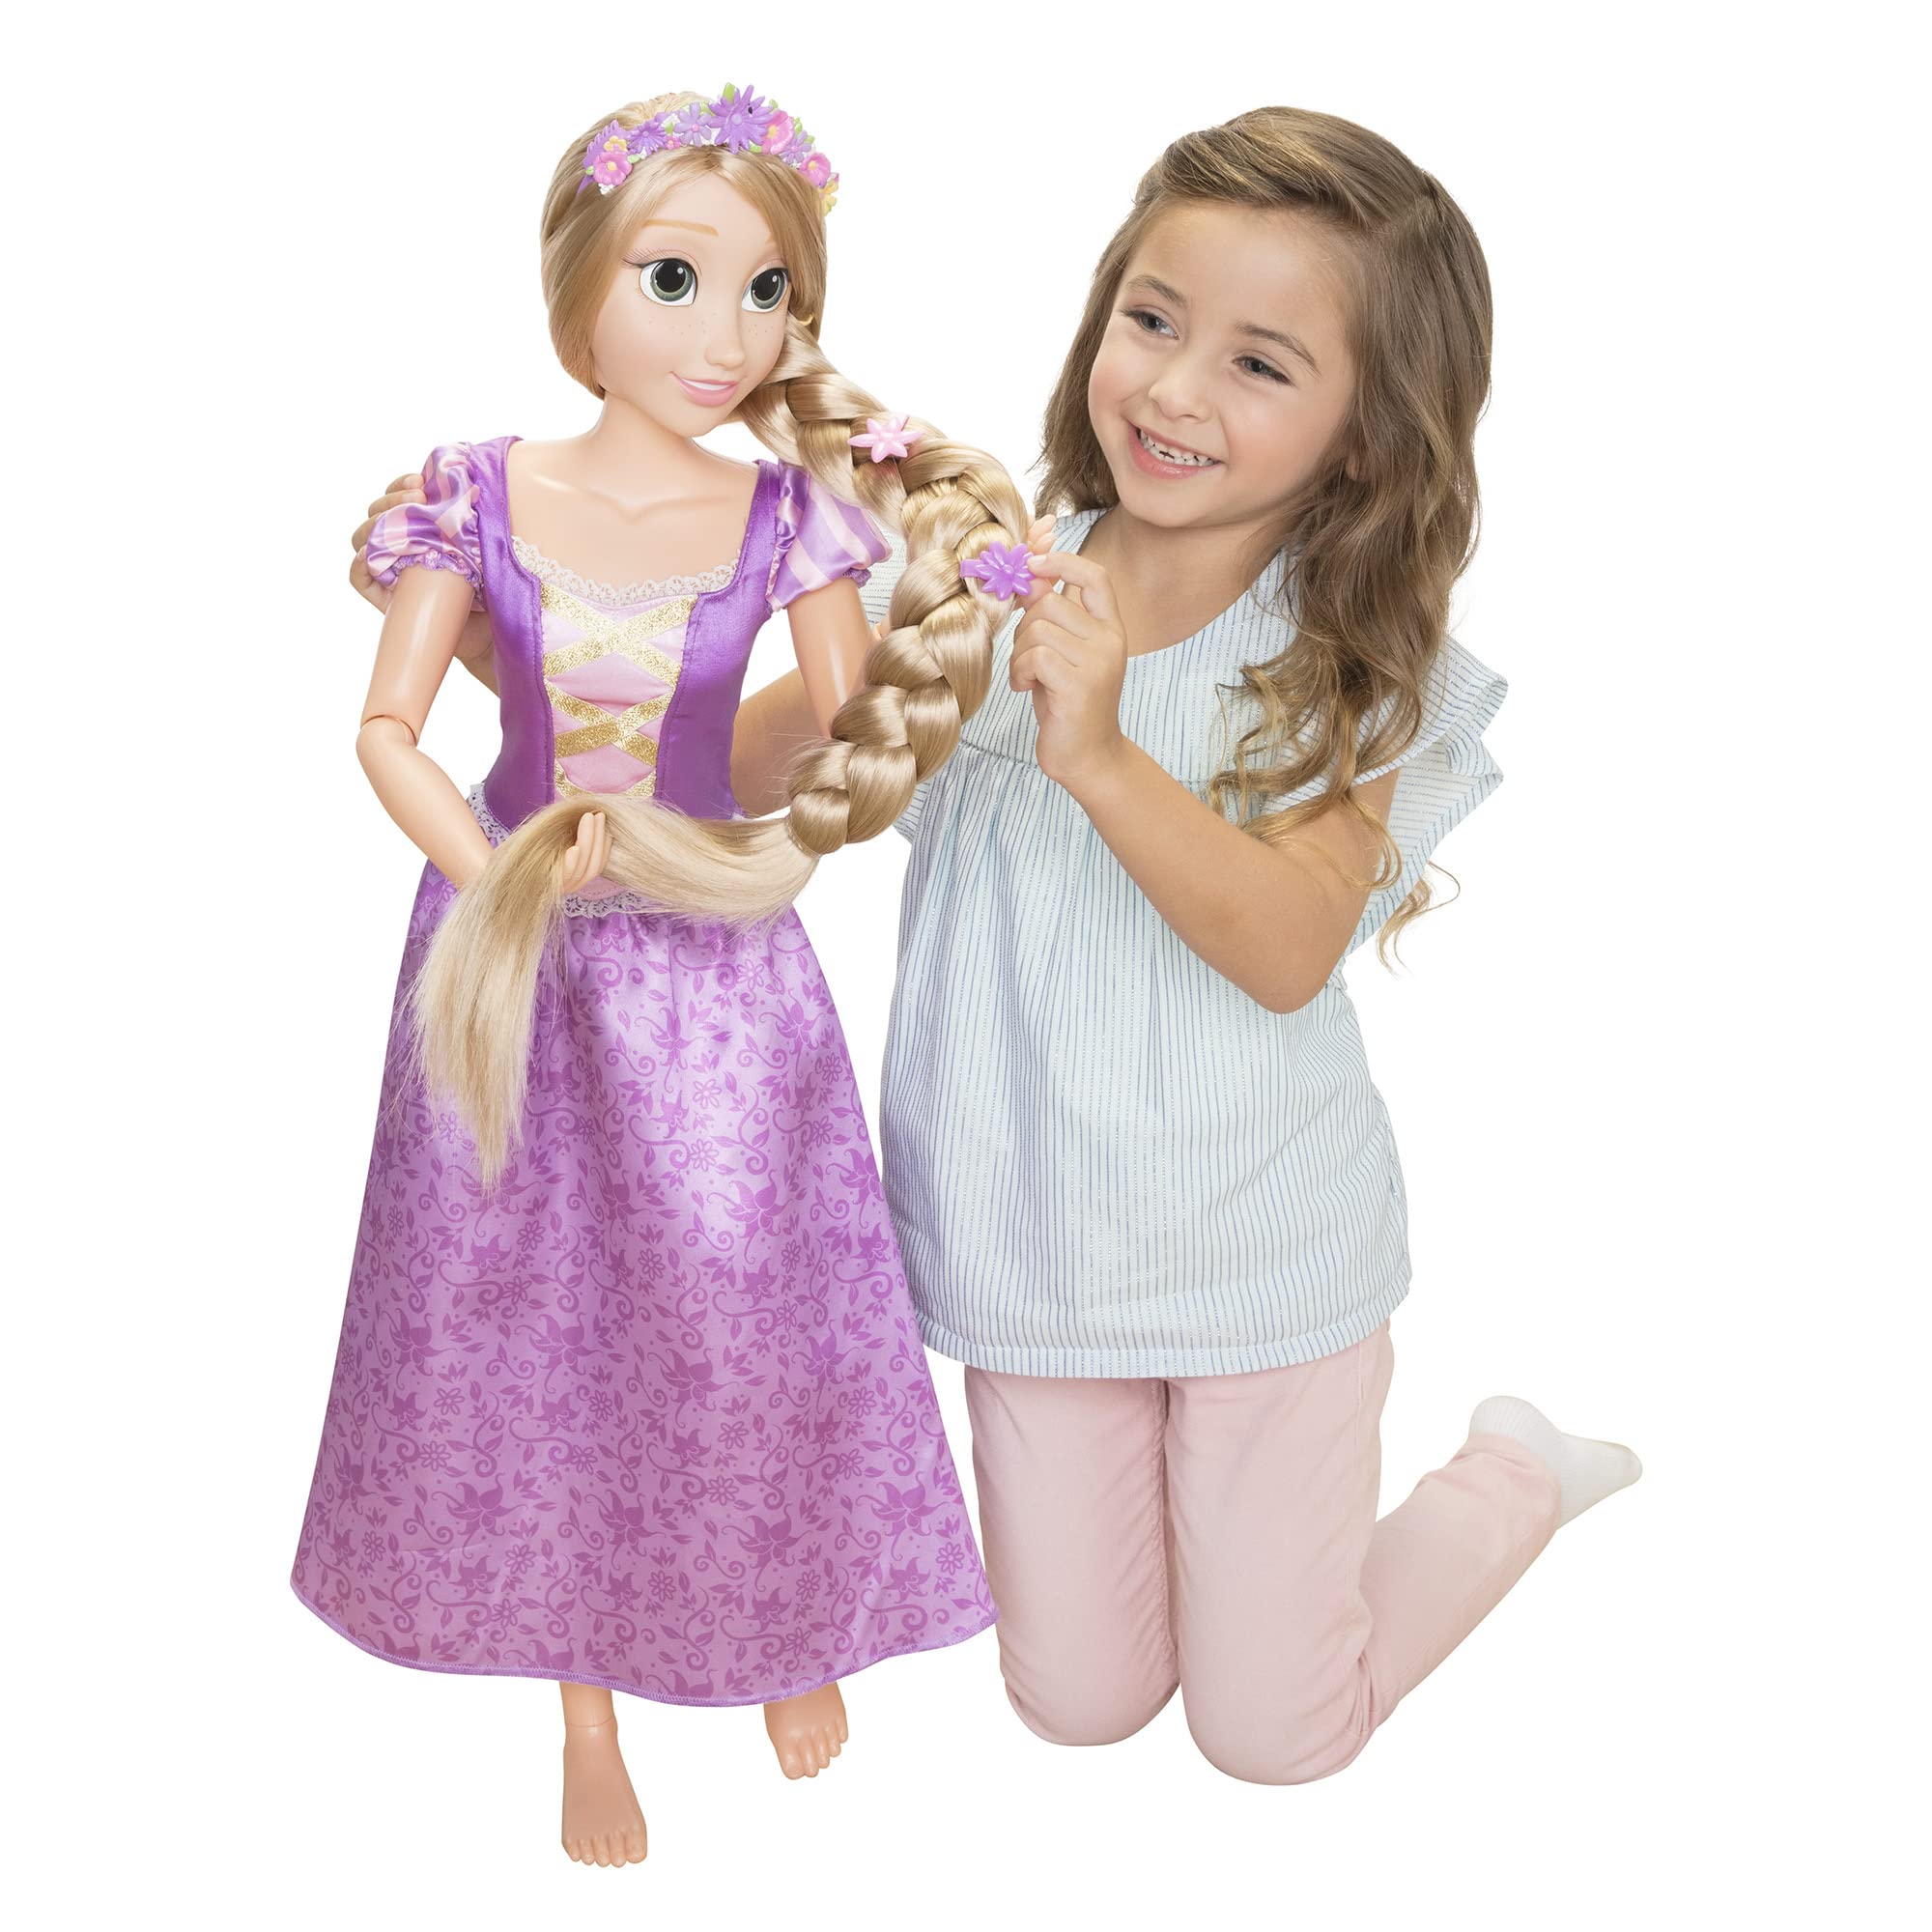 Disney Princess Rapunzel Doll Playdate 32 Tall & Poseable, My Size Articulated Doll in Purple Dress, Comes with Brush to Comb He